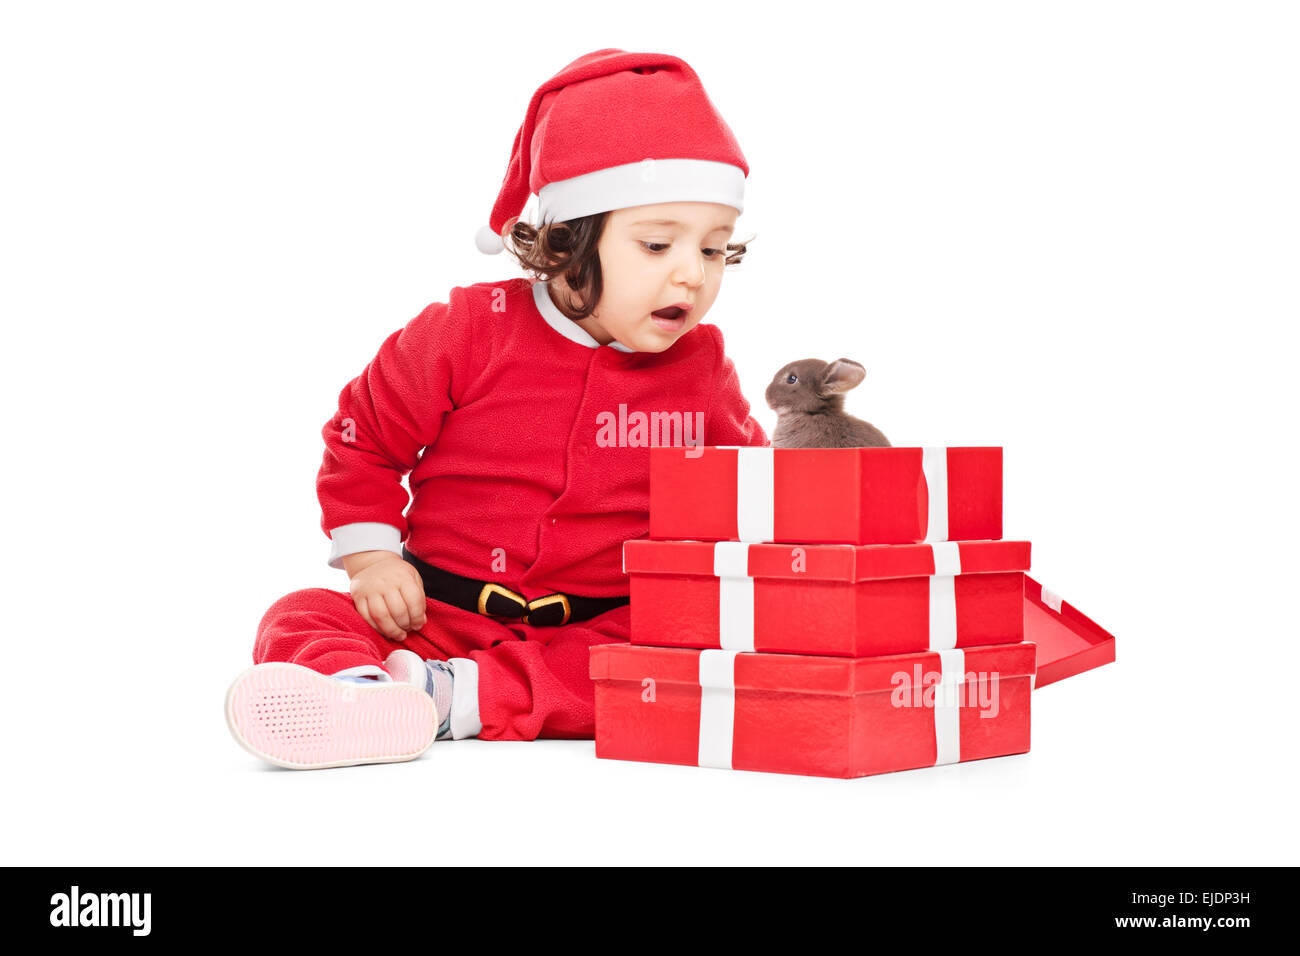 Adorable baby girl in Santa Claus costume opening the Christmas presents Stock Photo